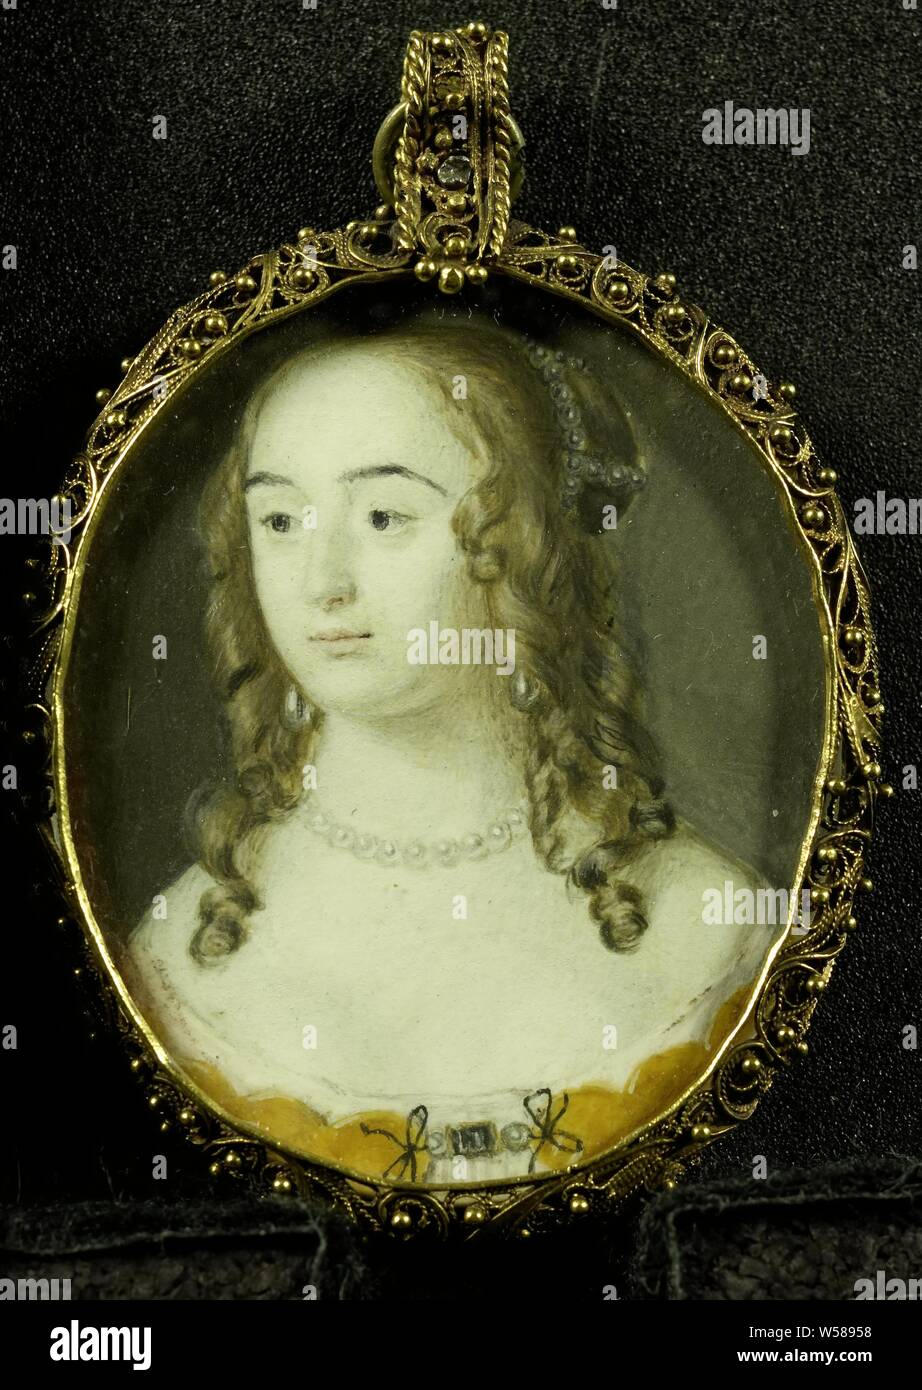 Portrait of Henriette Marie (1626-51), Countess Palatine. Daughter of Frederick V, King of Bohemia, called the 'Winter King', Portrait of Henriette Marie (1626-51) of the Paltz, daughter of Frederick V, king of Bohemia, nicknamed the 'Winter King'. Bust, to the left. To the portrait by Honthorst in the National Gallery in London. Formerly incorrectly identified as Albertina Agnes, Countess of Nassau. Part of the collection of portrait miniatures, Henriette Maria van de Palts, Alexander Cooper, 1640 - 1650, cardboard, gold (metal), glass, h 4.7 cm × w 3.7 cm h 6 cm × w 4.2 cm × d 0.6 cm Stock Photo